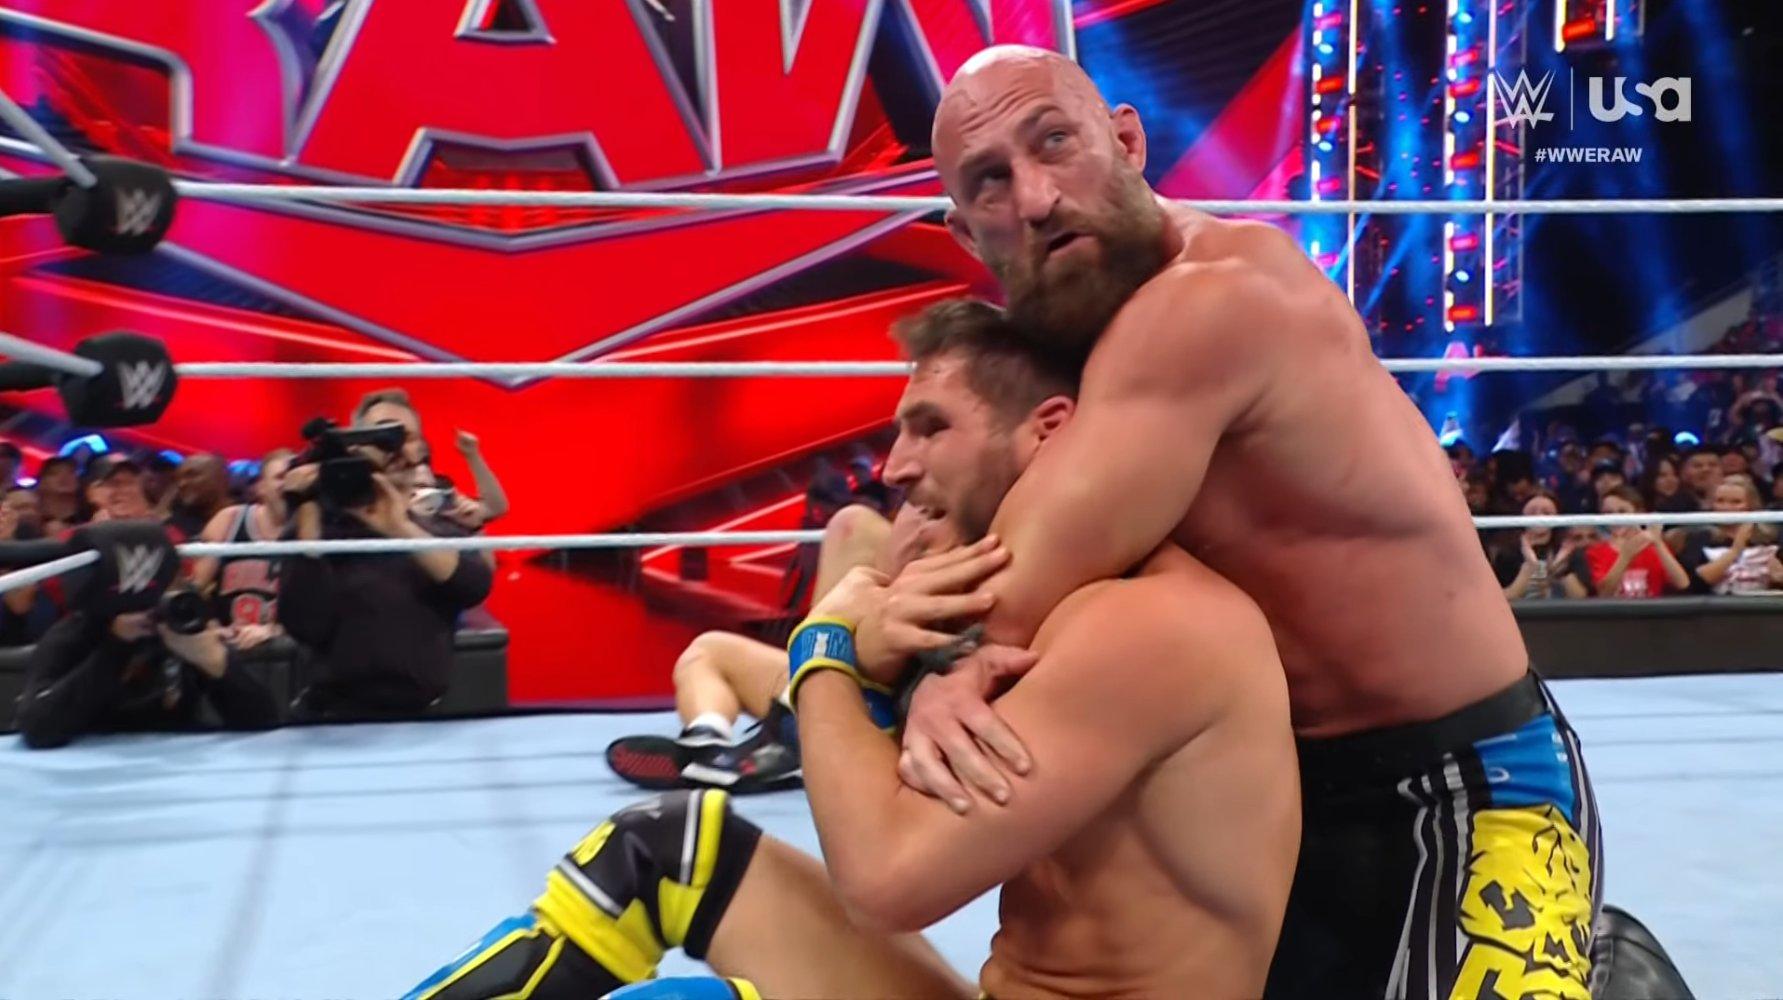 DIY Will Compete in Their First Wrestlemania, Qualifies for Six-Pack Tag Team Ladder Match